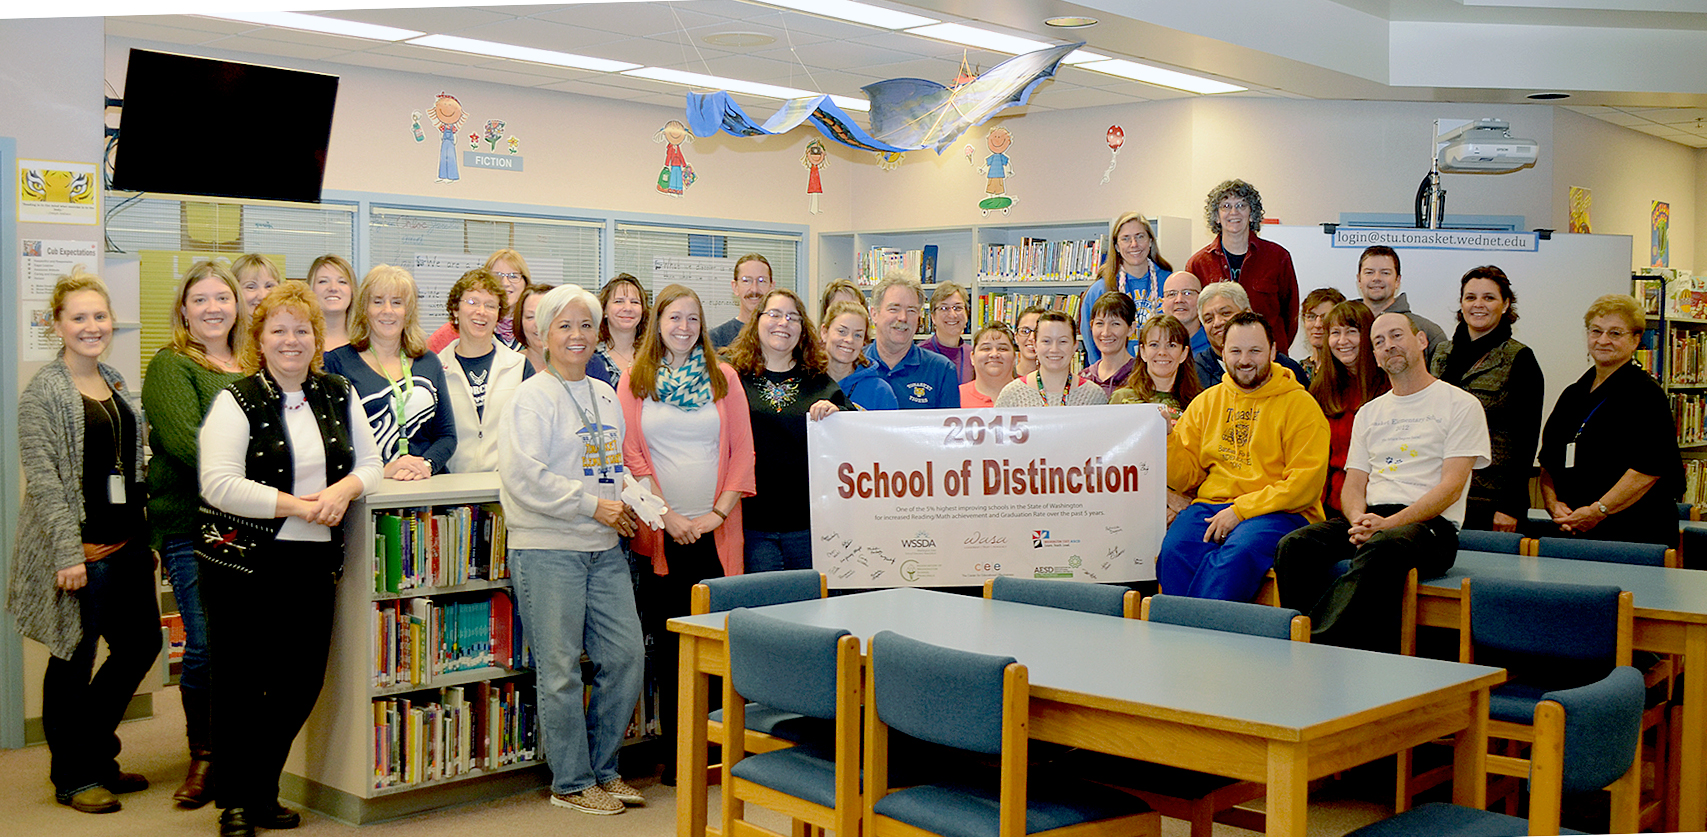 Tonasket Elementary School Staff celebrate being one of 90 schools in Washington State to be given the 2015 School of Distinction Award. Katie Teachout/staff photos